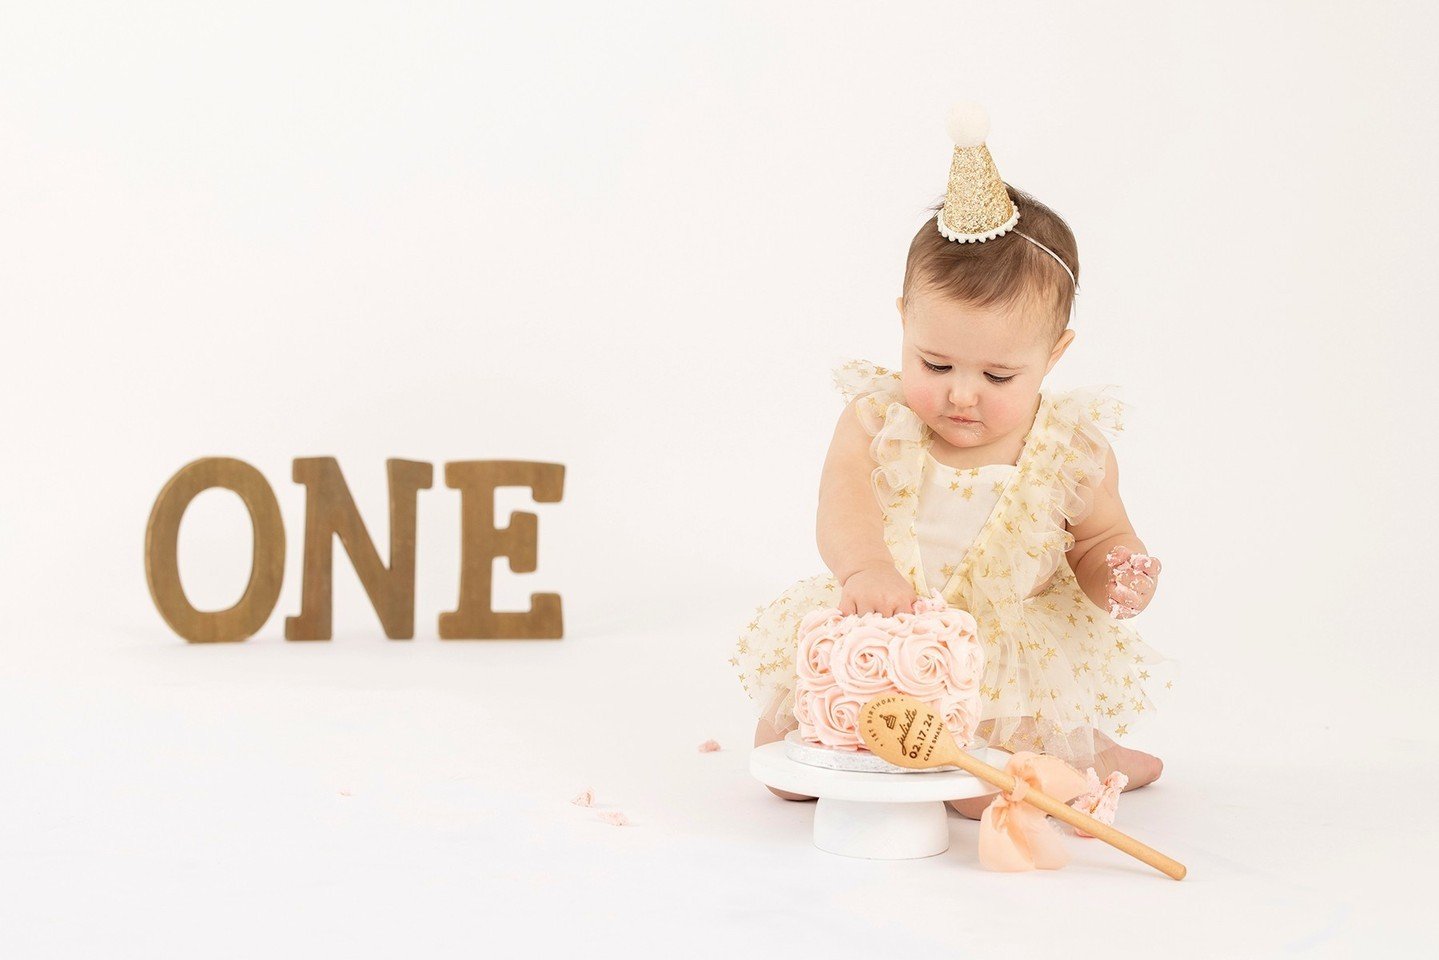 Nina is not only the best photographer, she made this dress too. Her talent is endless! The perfect look for a first birthday smash cake session! 
.⁠
.⁠
.⁠
#FamilyPortraitSession #NewbornPhotographers #NewbornPhotographyProps #NewbornPhotoshoot #Newb